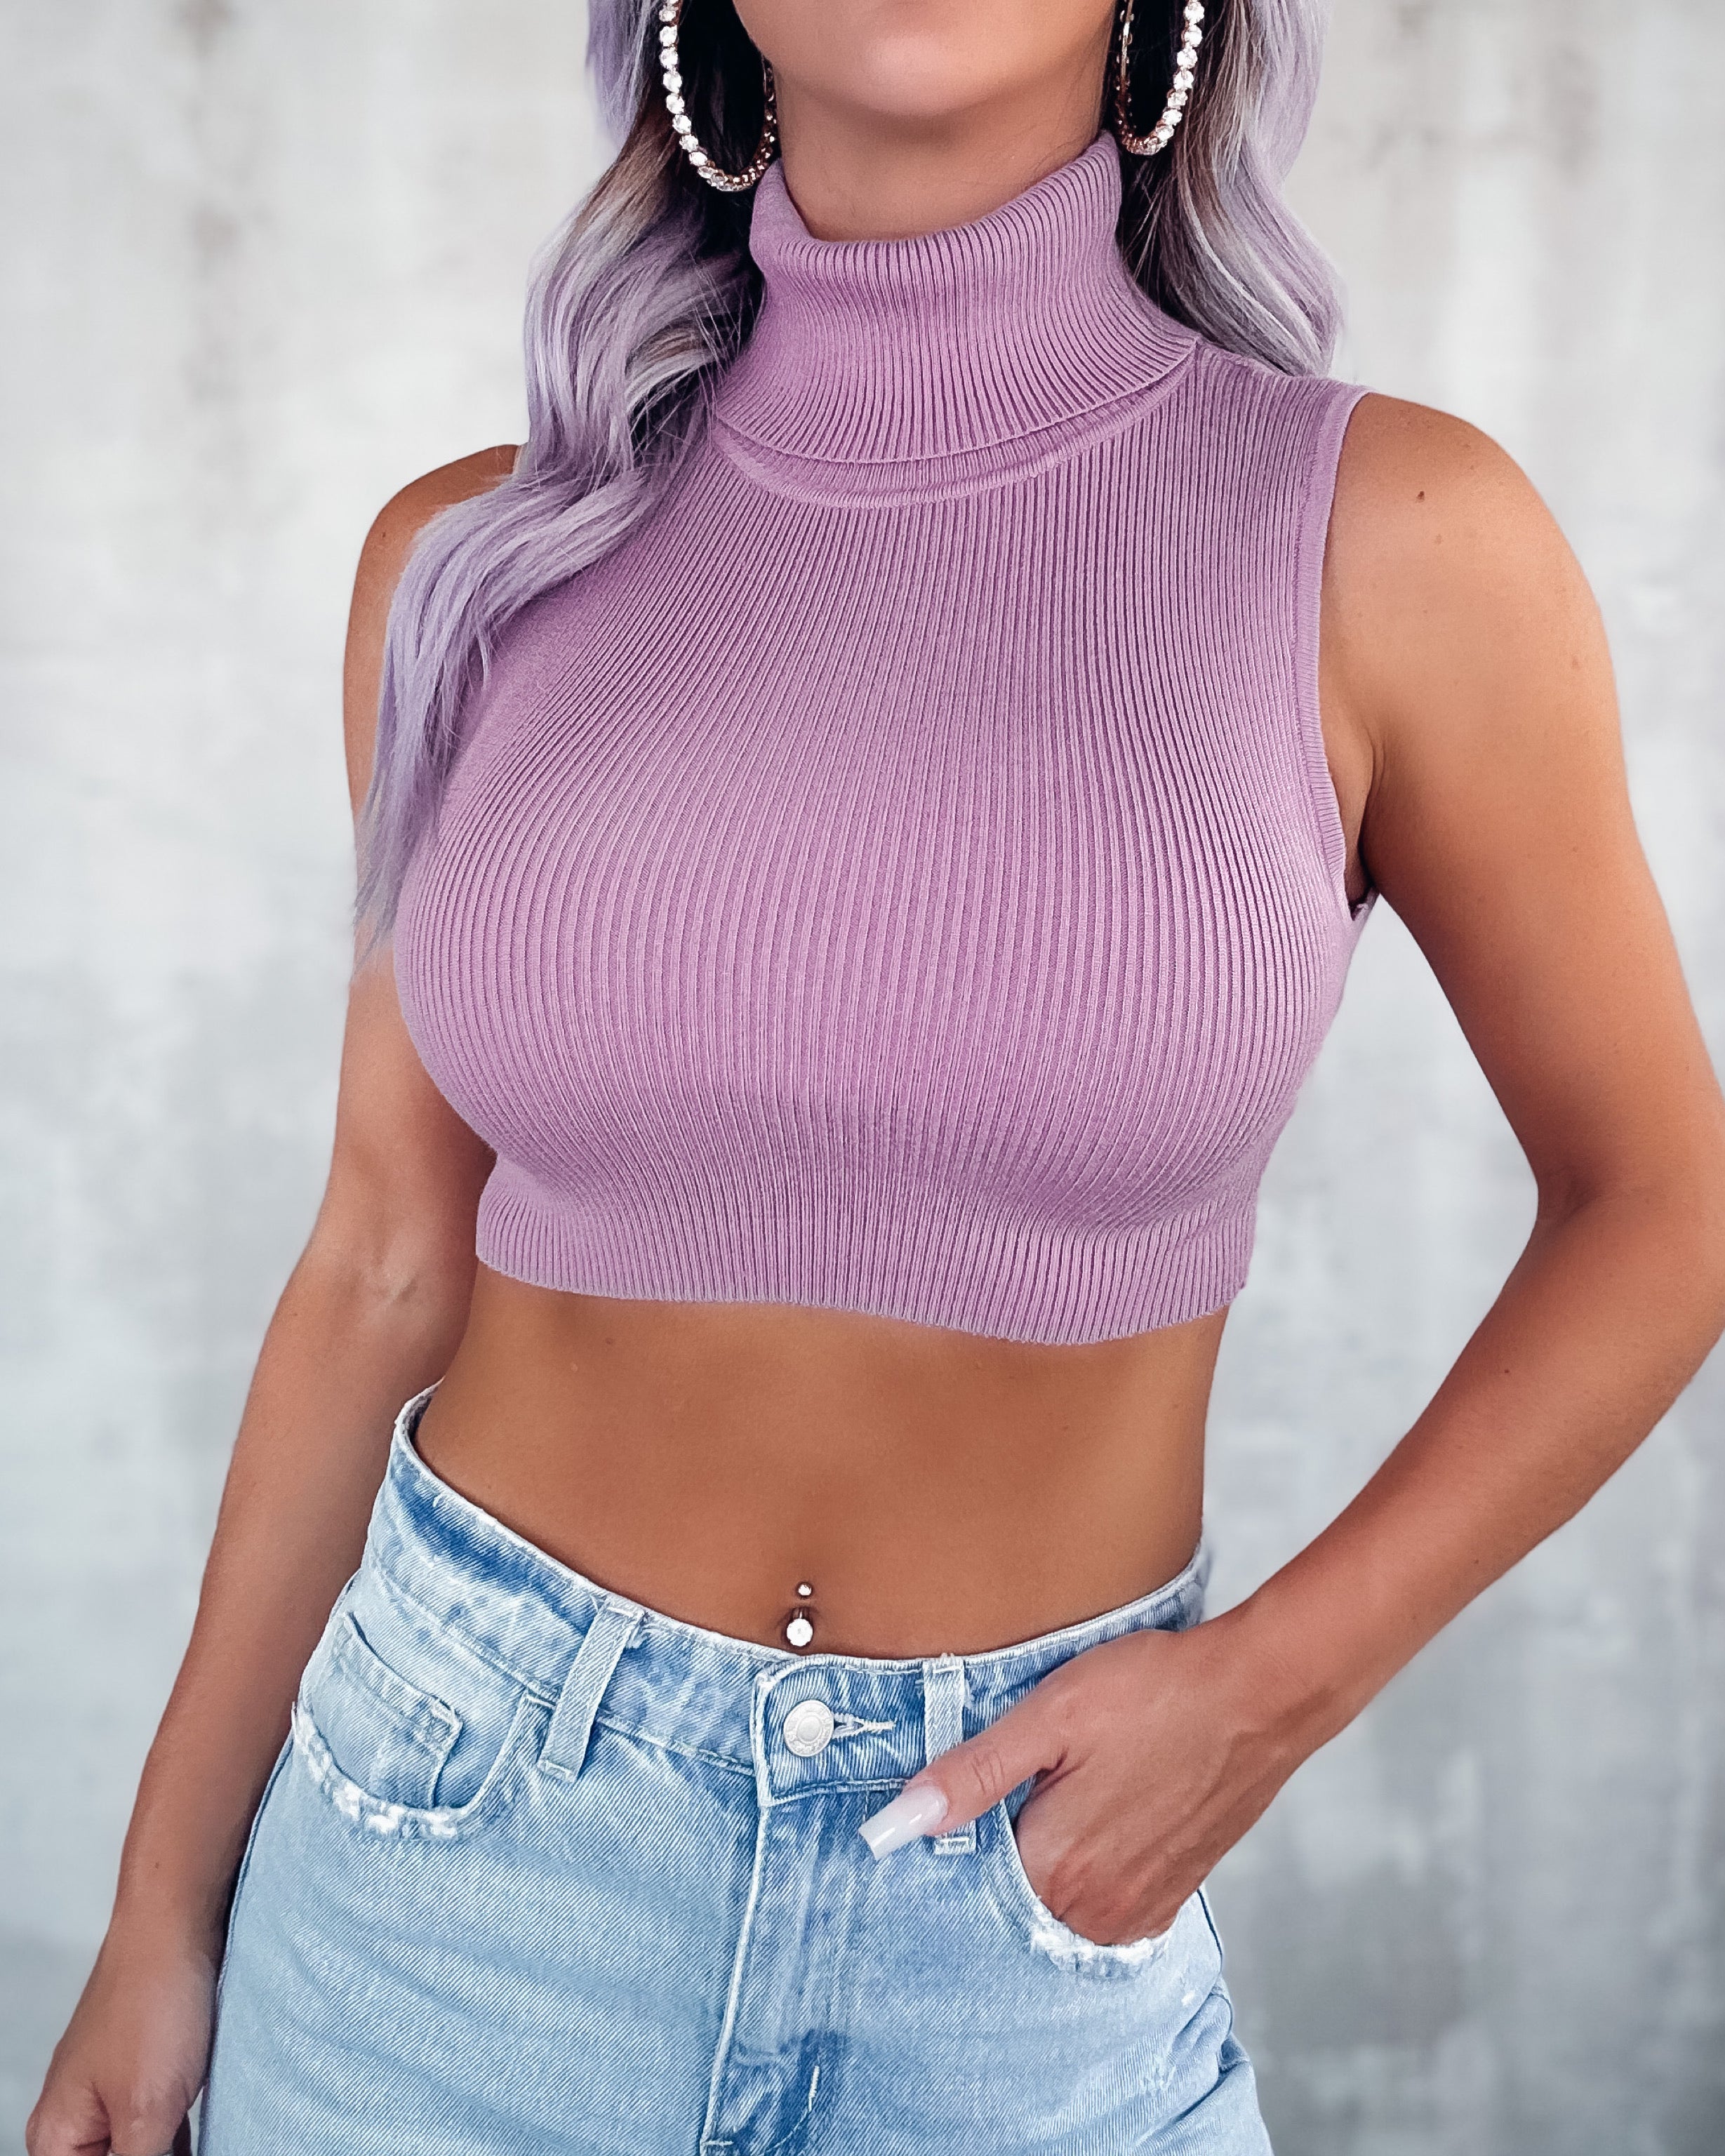 Polished Tasted Turtle Neck Sweater Crop Top - Mauve